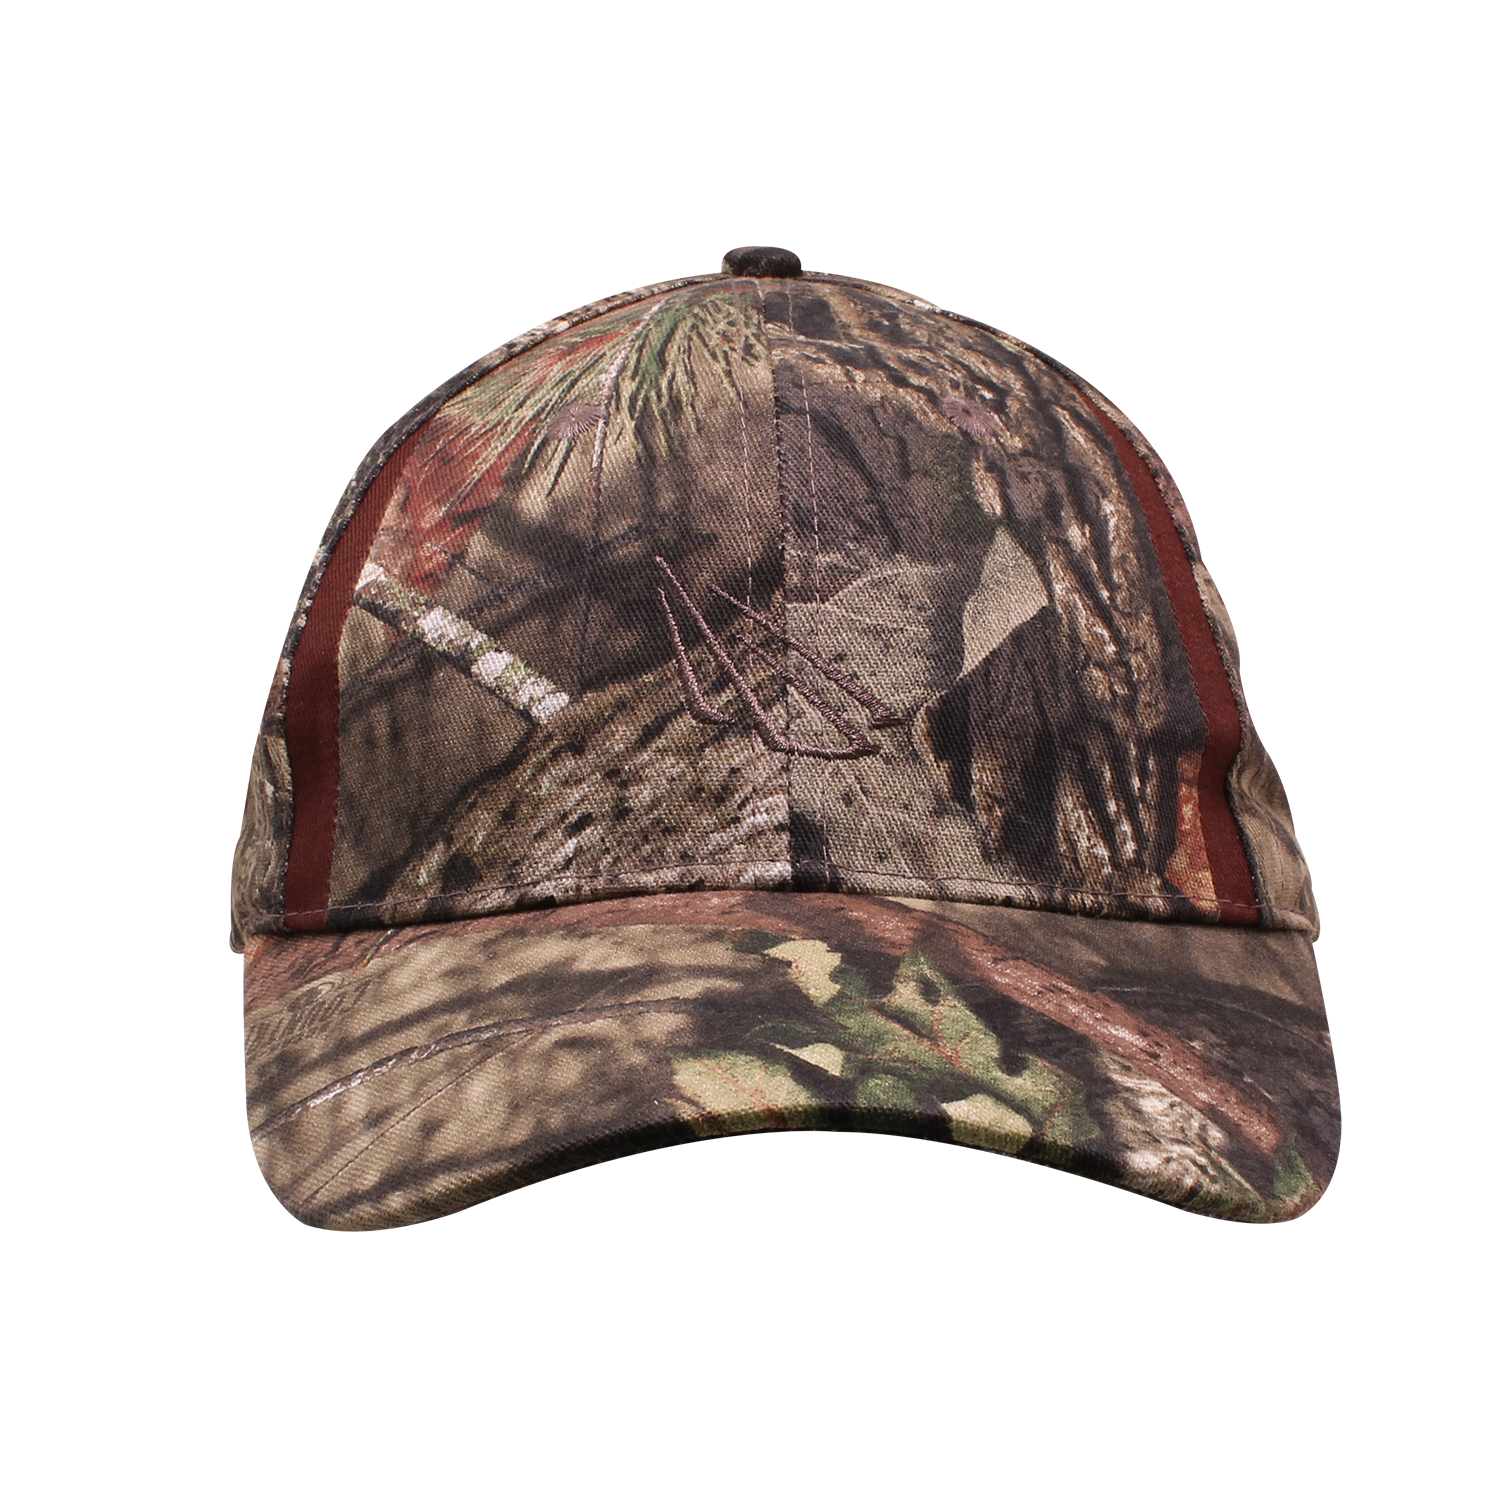 CLEARANCE - PowerCap LED Lighted Hat